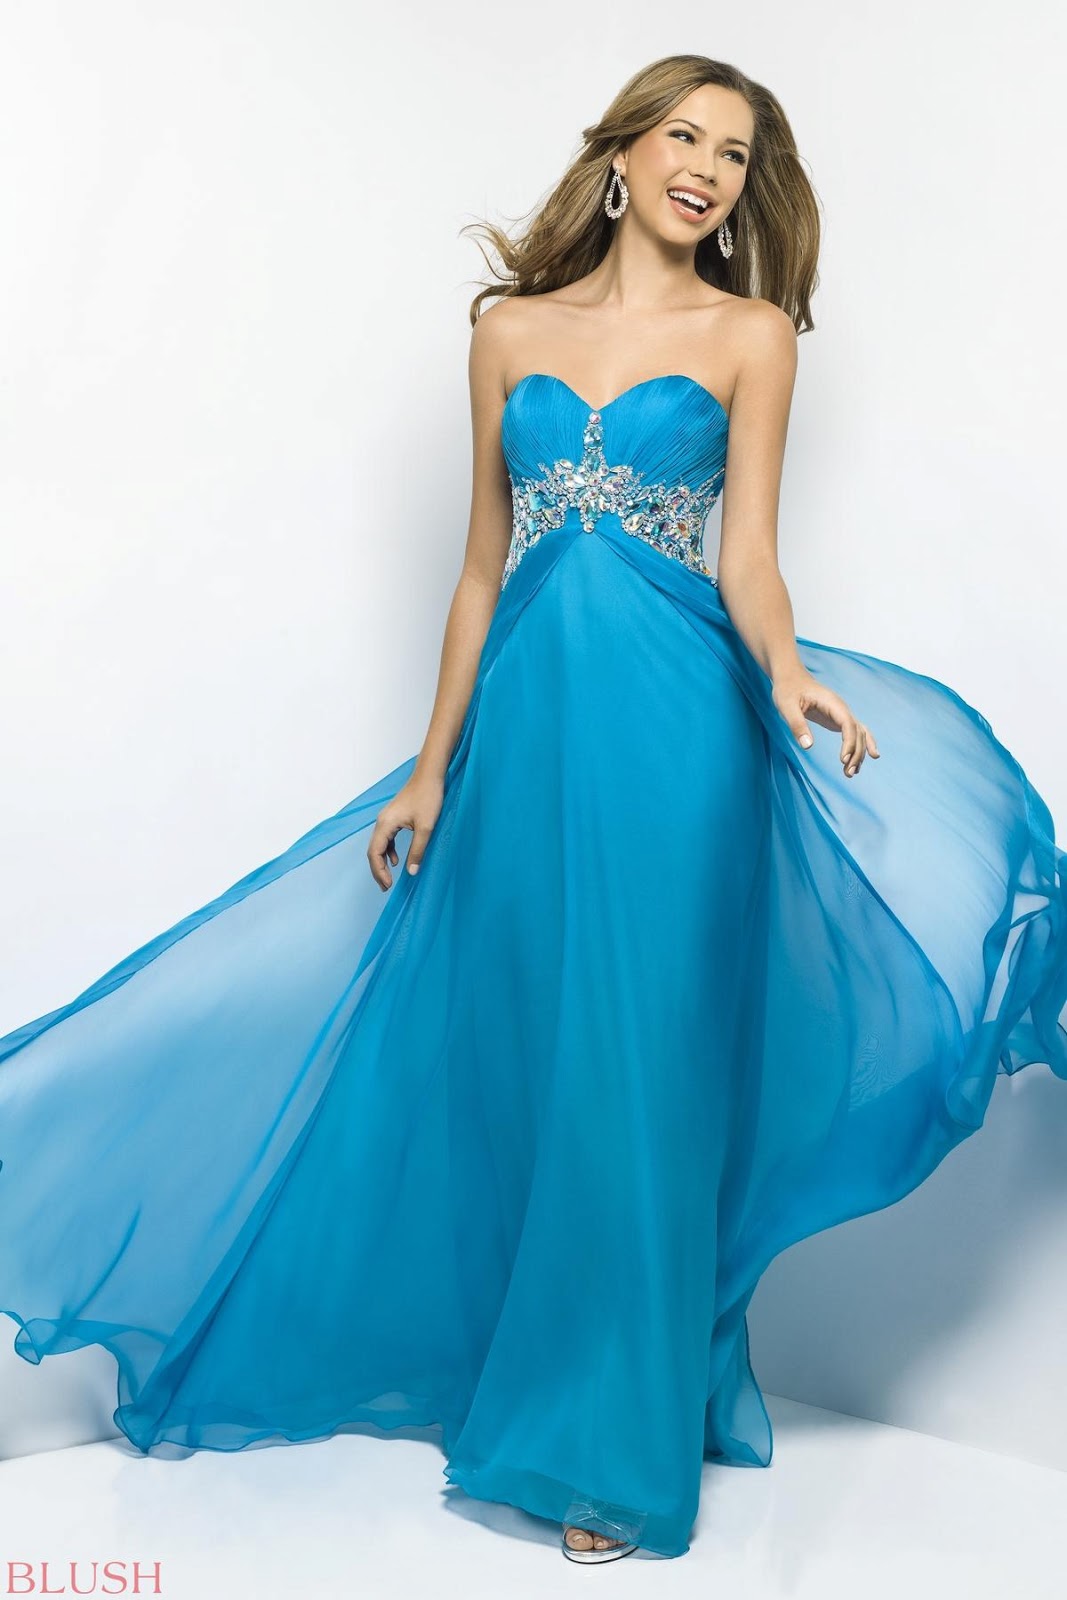 Fashion And Stylish Dresses Blog: 2013 Prom Dresses Collection From ...